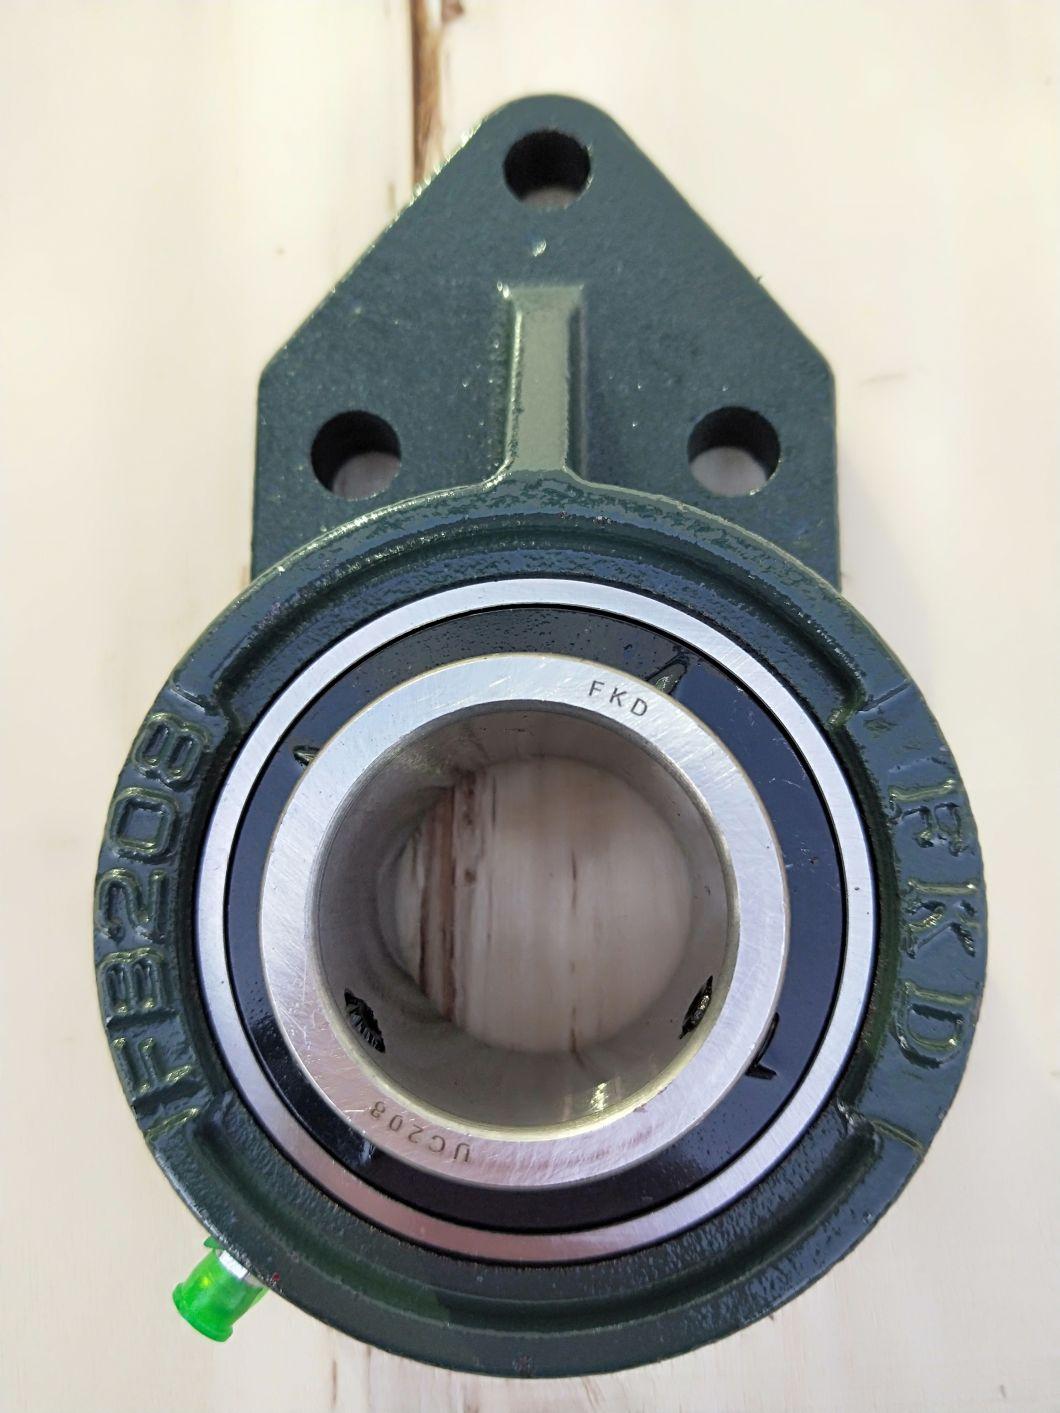 High Quality Ucfb Pillow Block Bearing with Reasonable Price